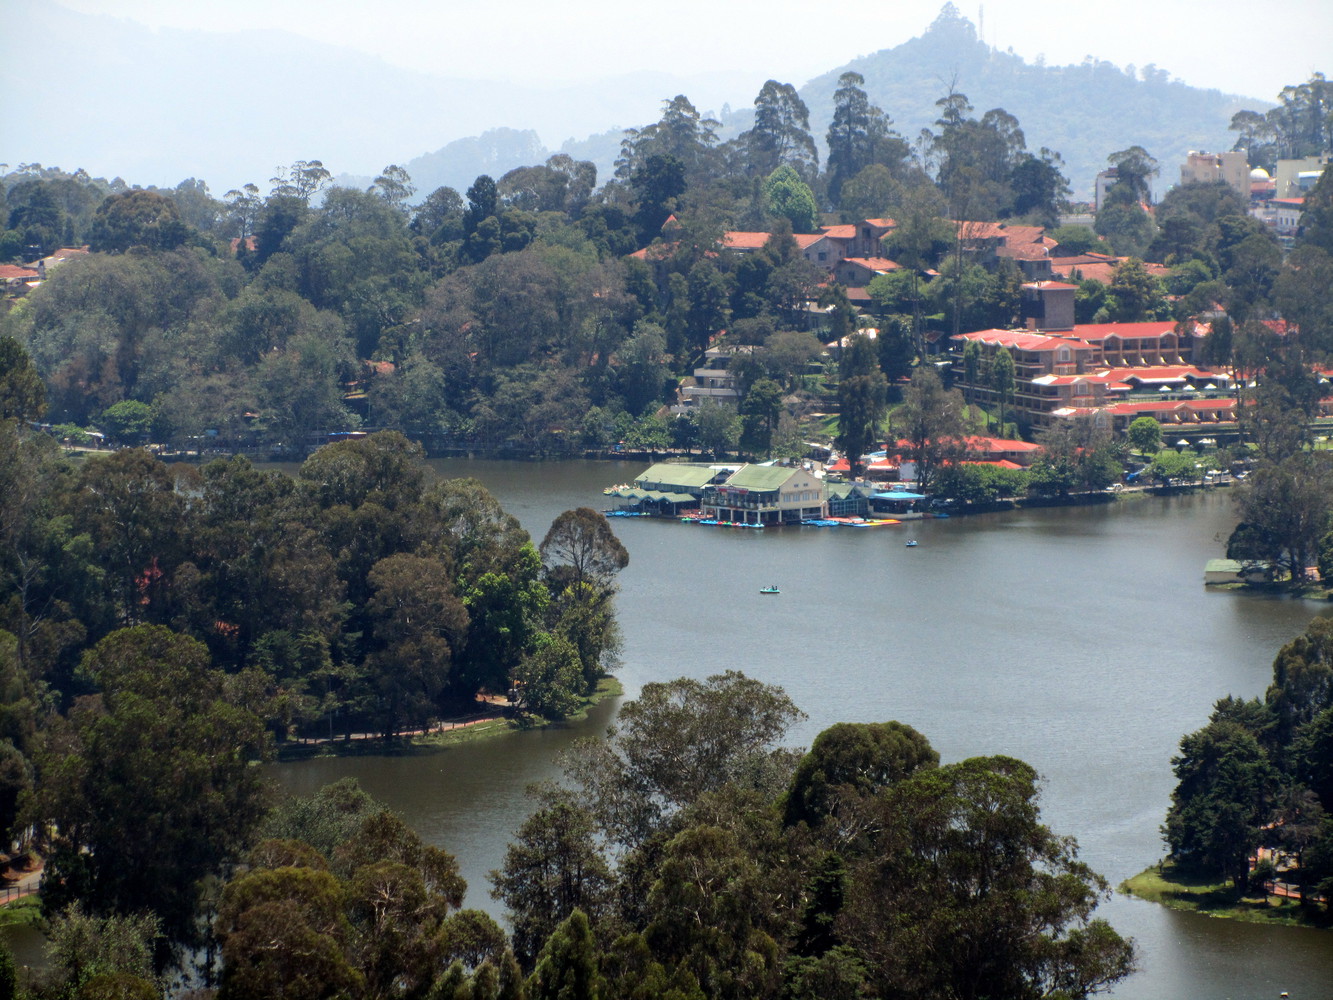 A lake surrounded by boathouse, hotels, and trees